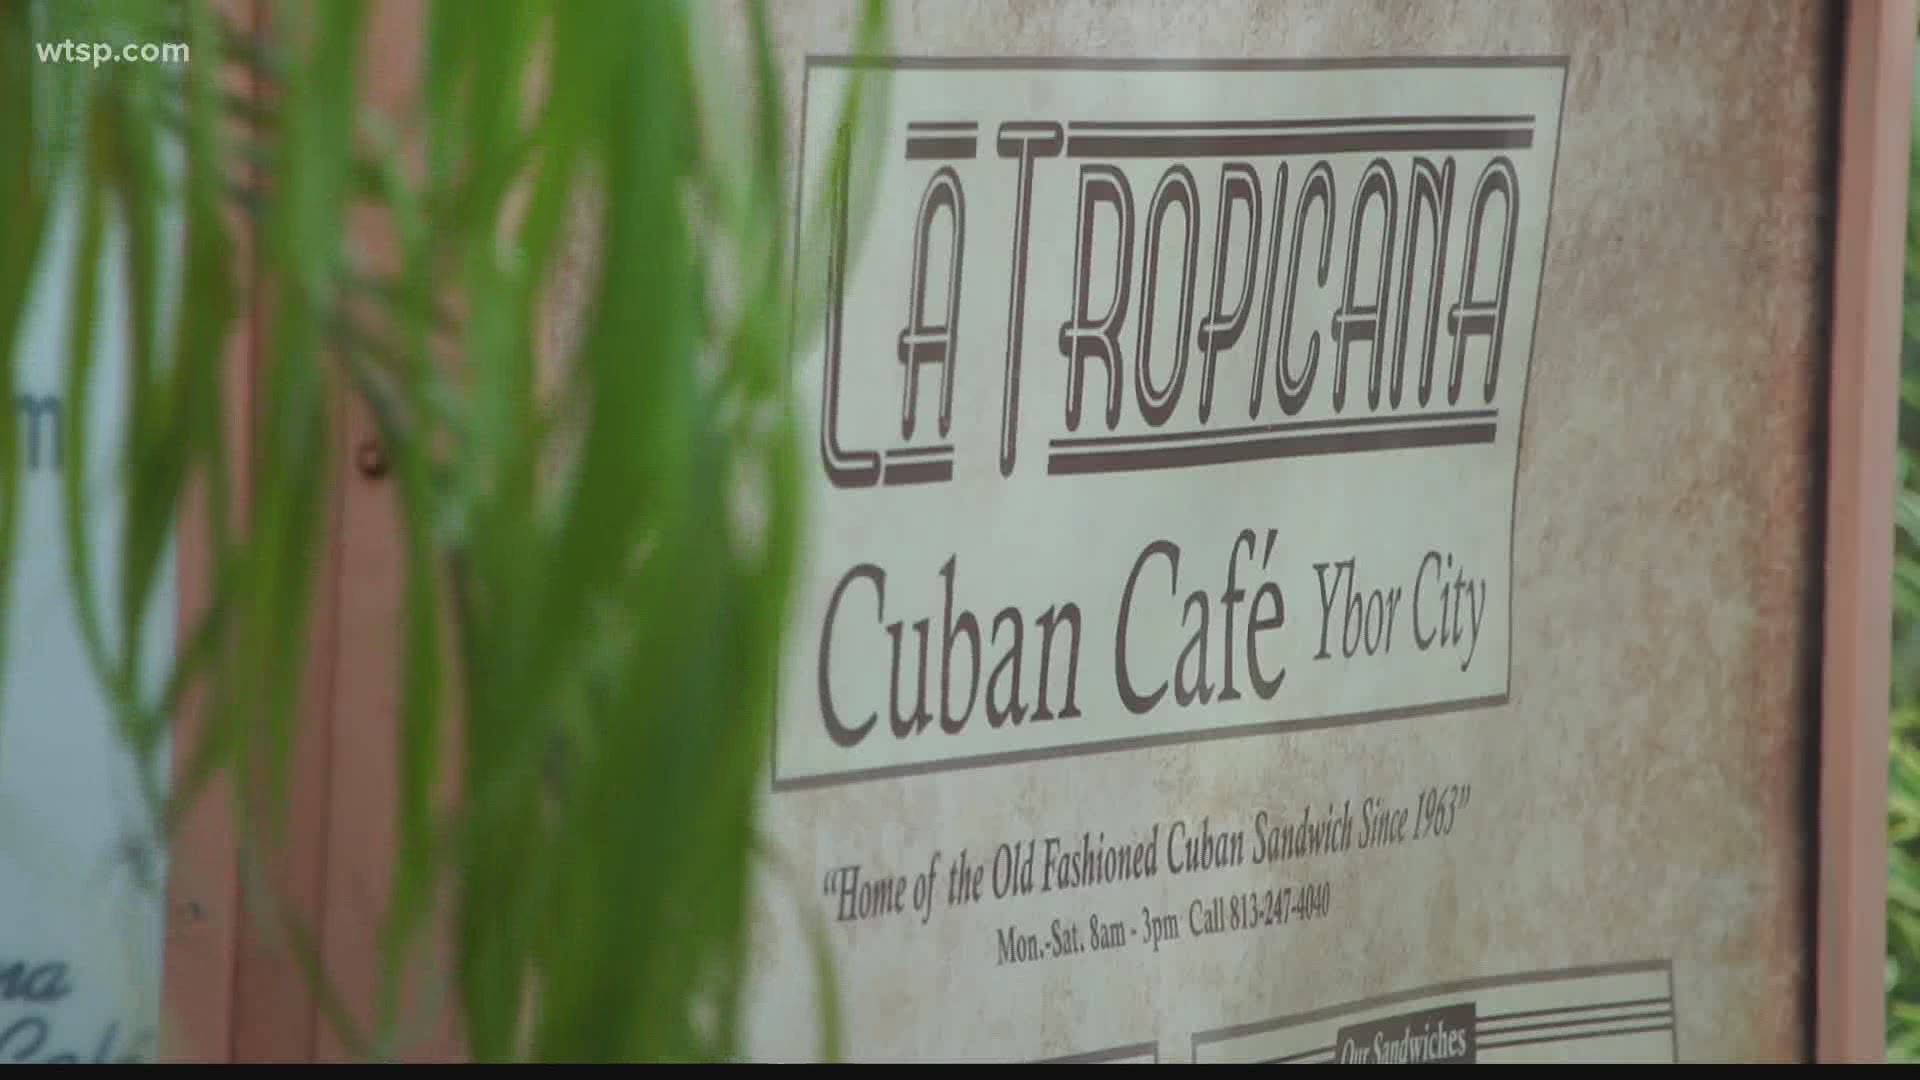 La Tropicana Cafe brought in political figures and prominent leaders from across the country. It won't reopen after being closed for several weeks.